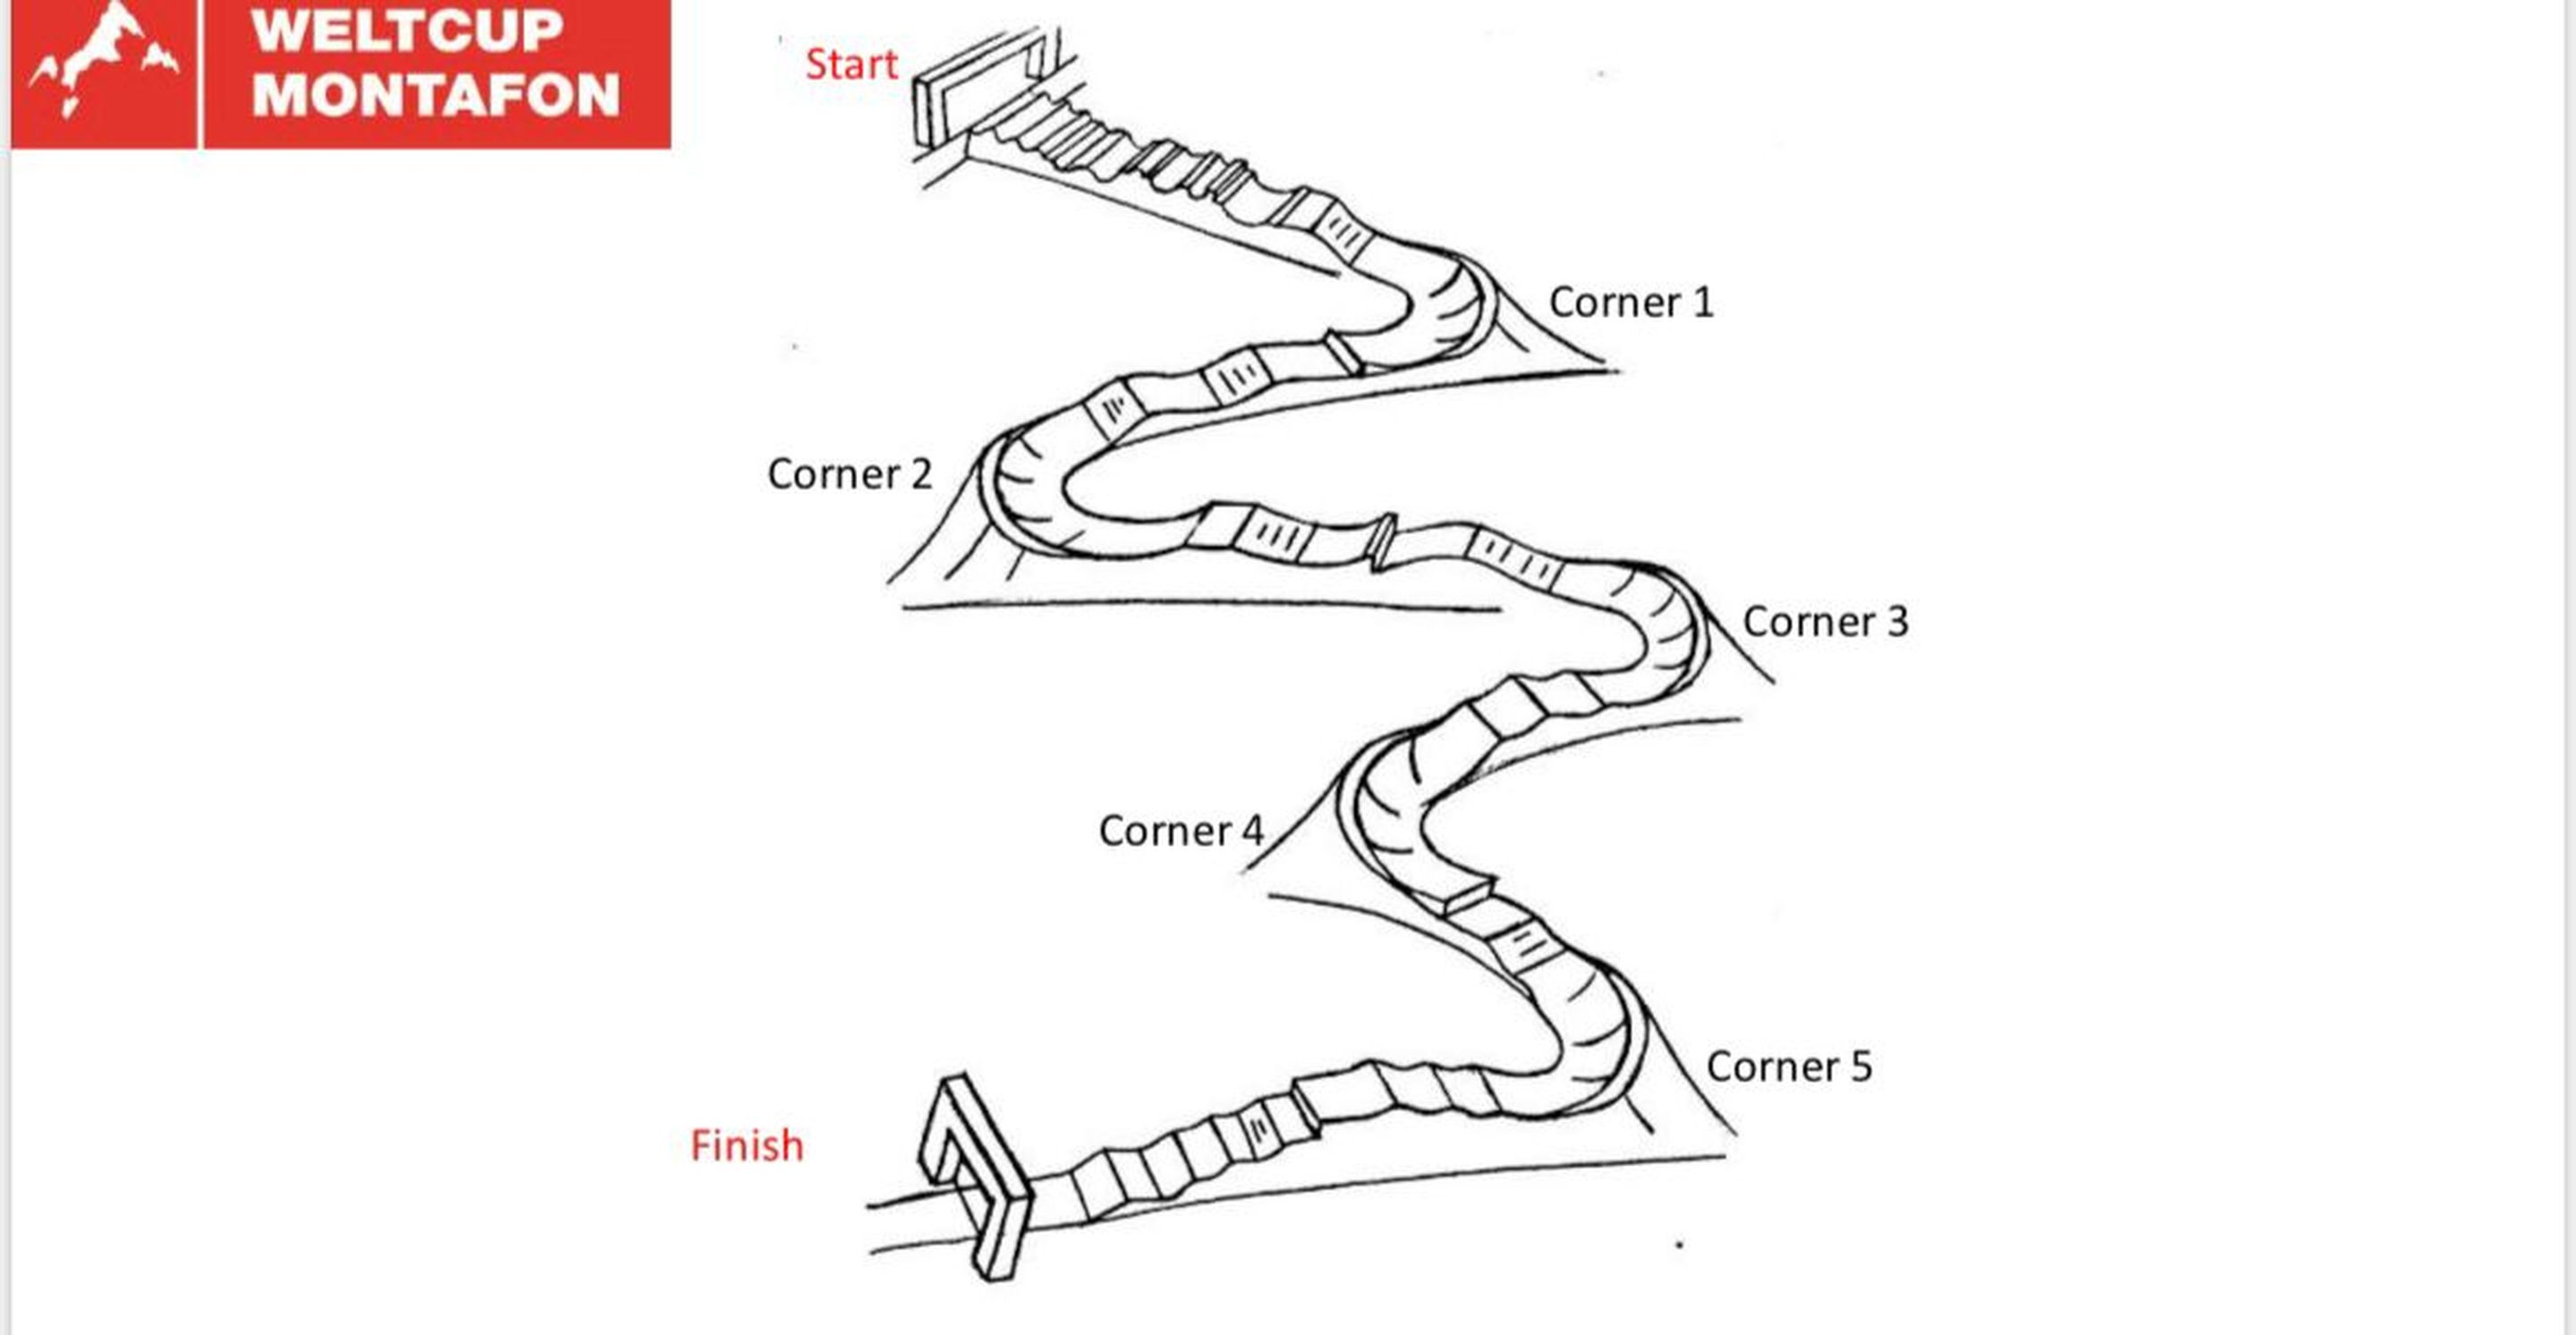 Graphic of the Montafon course